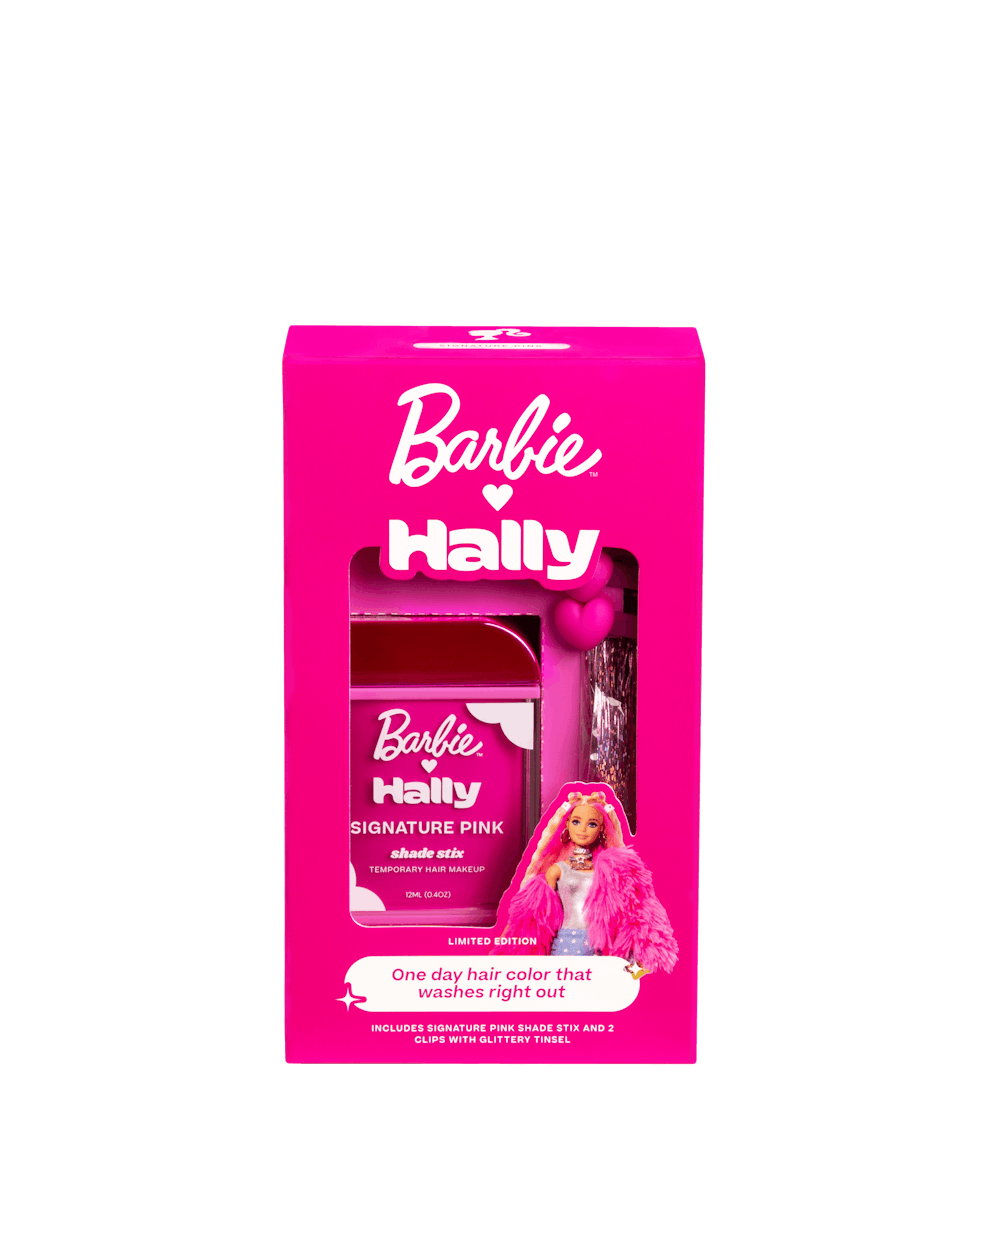 All Of This Summer's 'Barbie' Collabs, From The Sensible To The Absurd